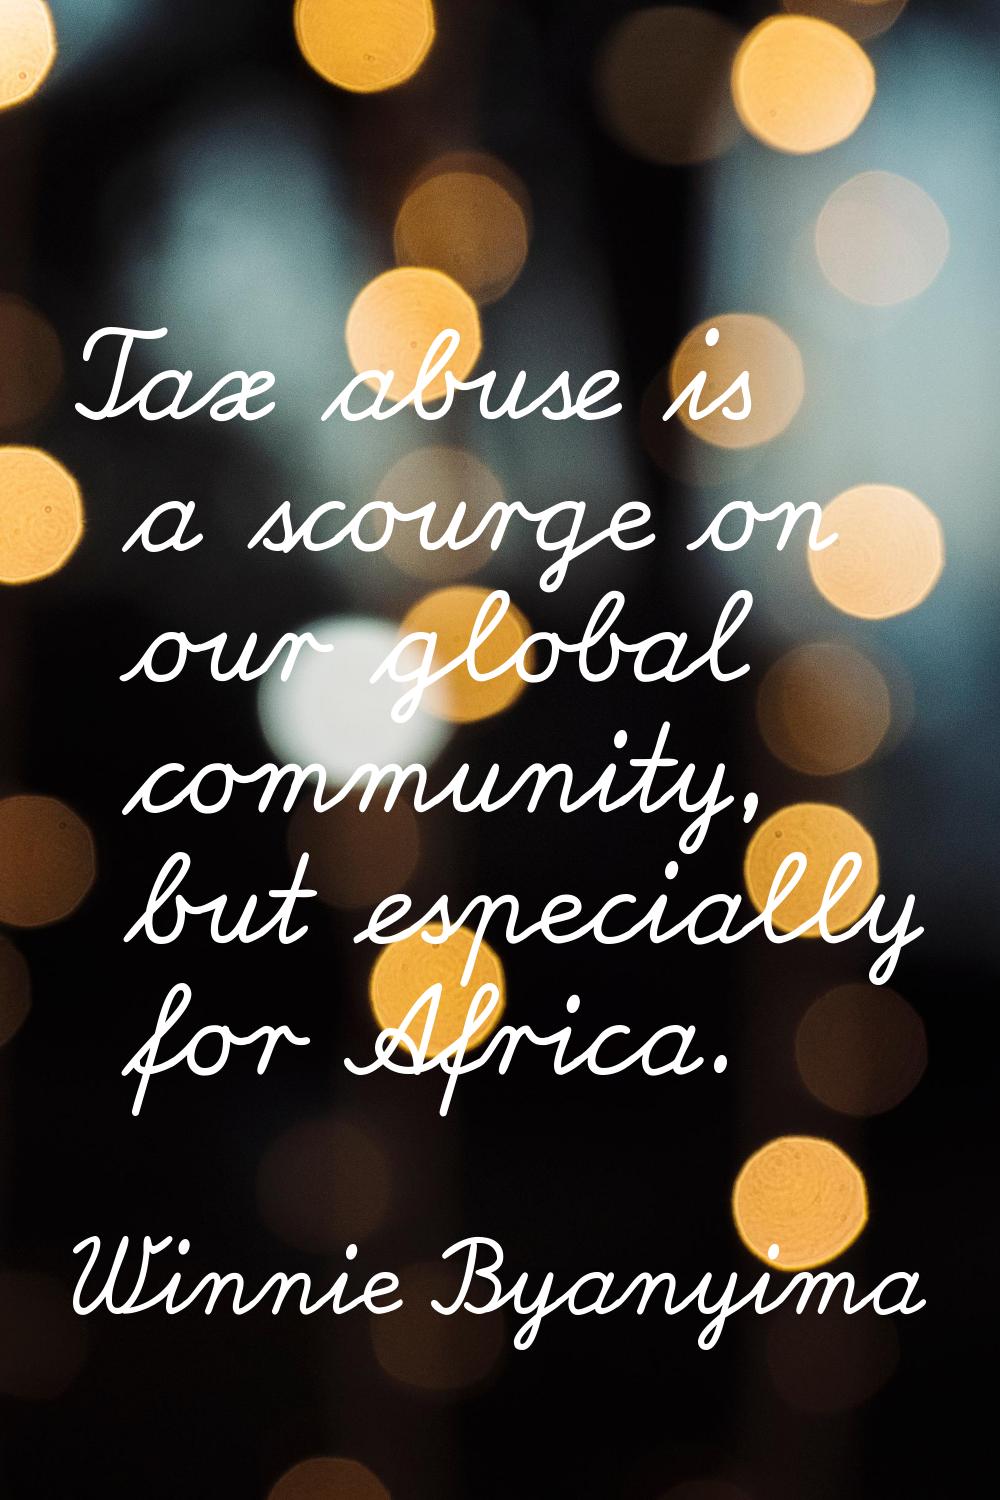 Tax abuse is a scourge on our global community, but especially for Africa.